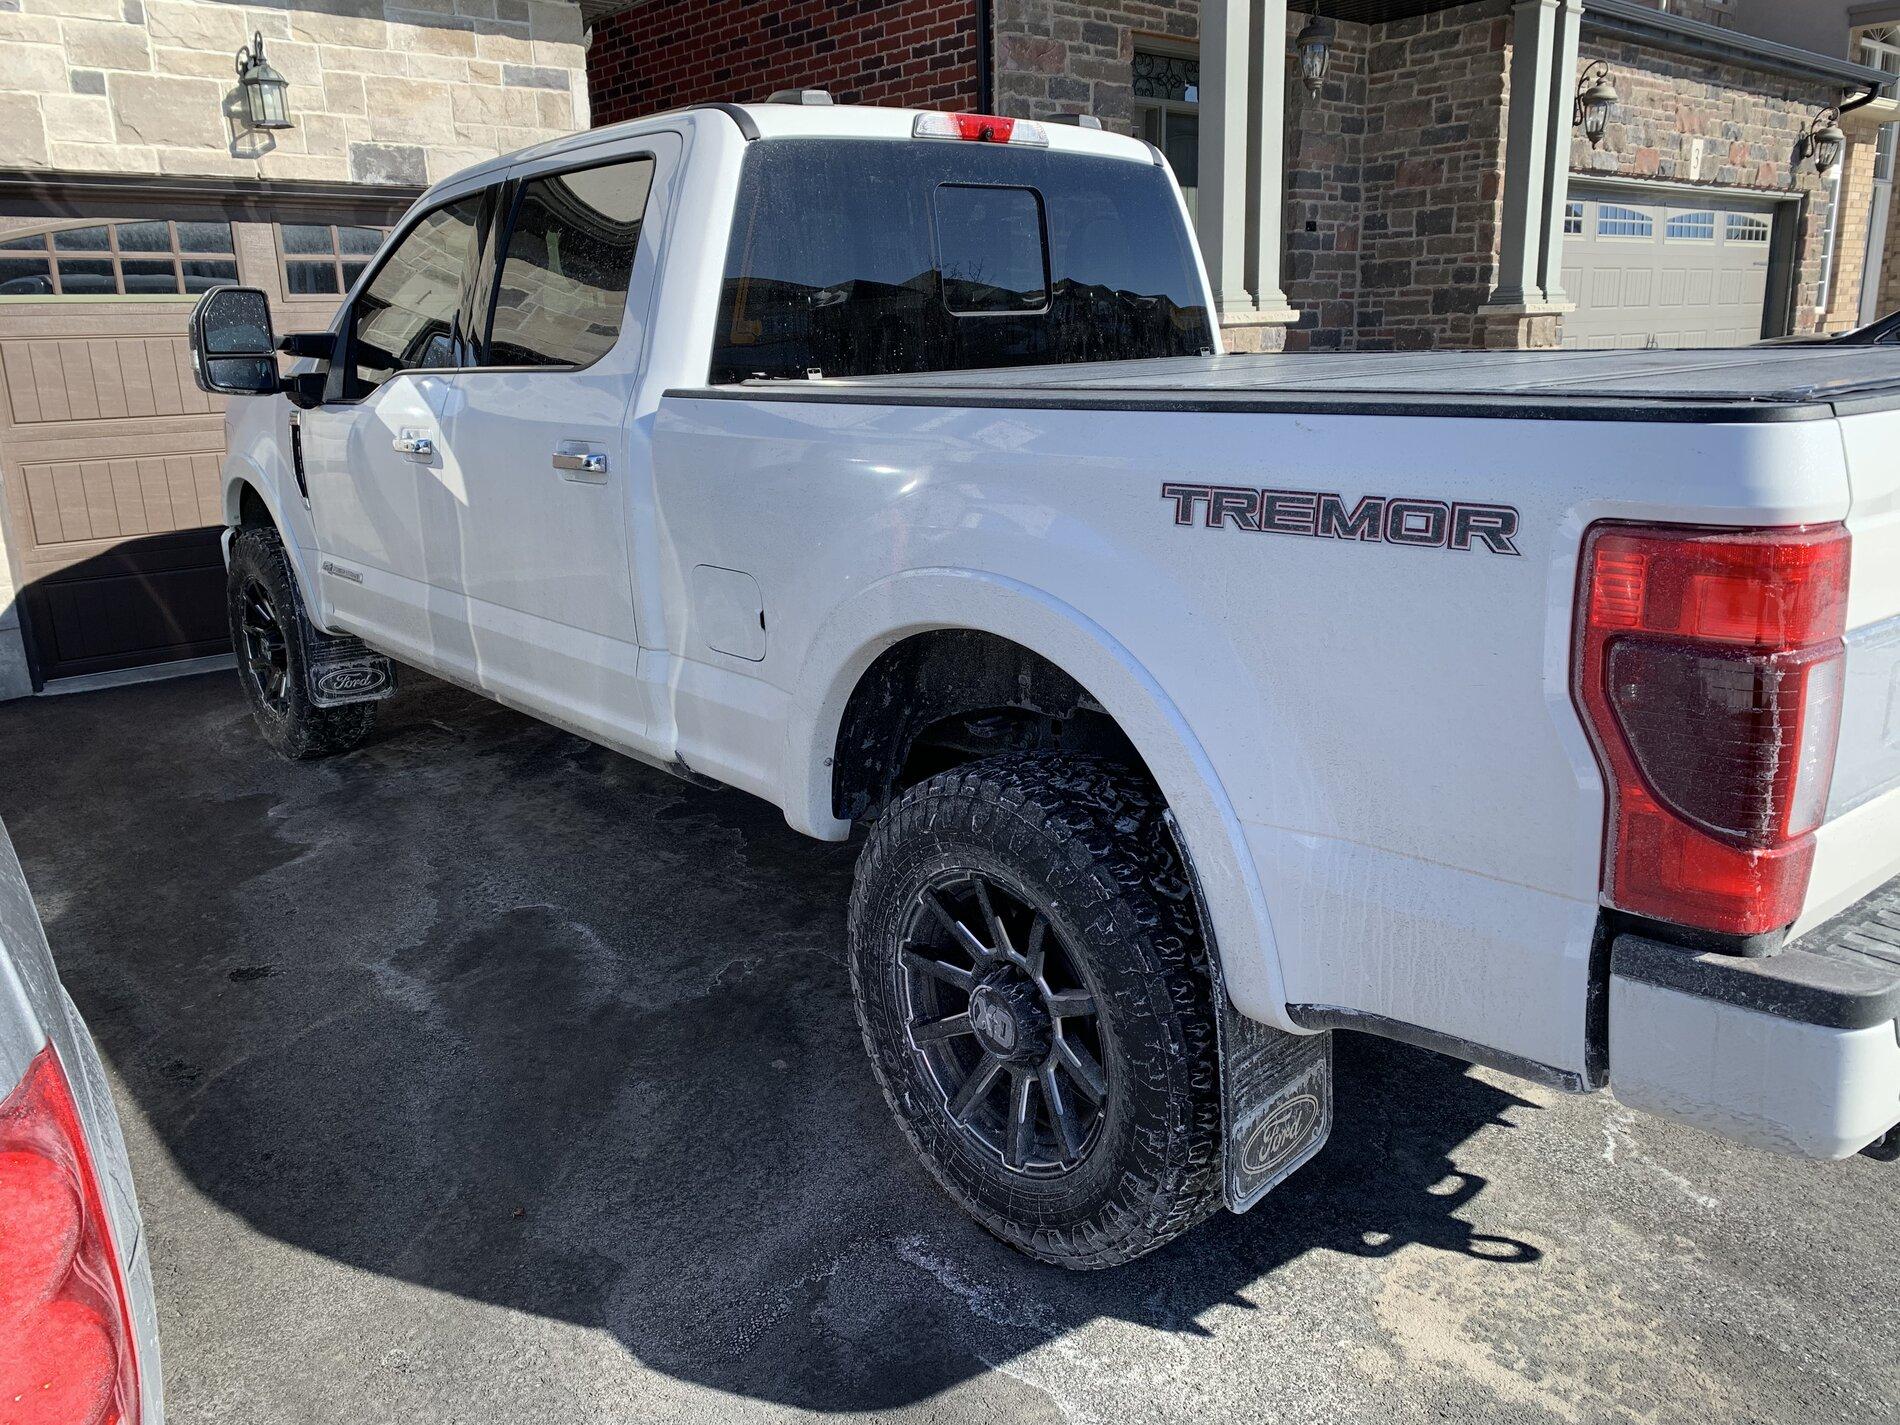 Aluminum body corrosion warning when installing aftermarket parts on F-150   Ford Lightning Forum For F-150 Lightning EV Pickup: News, Owners,  Discussions, Community